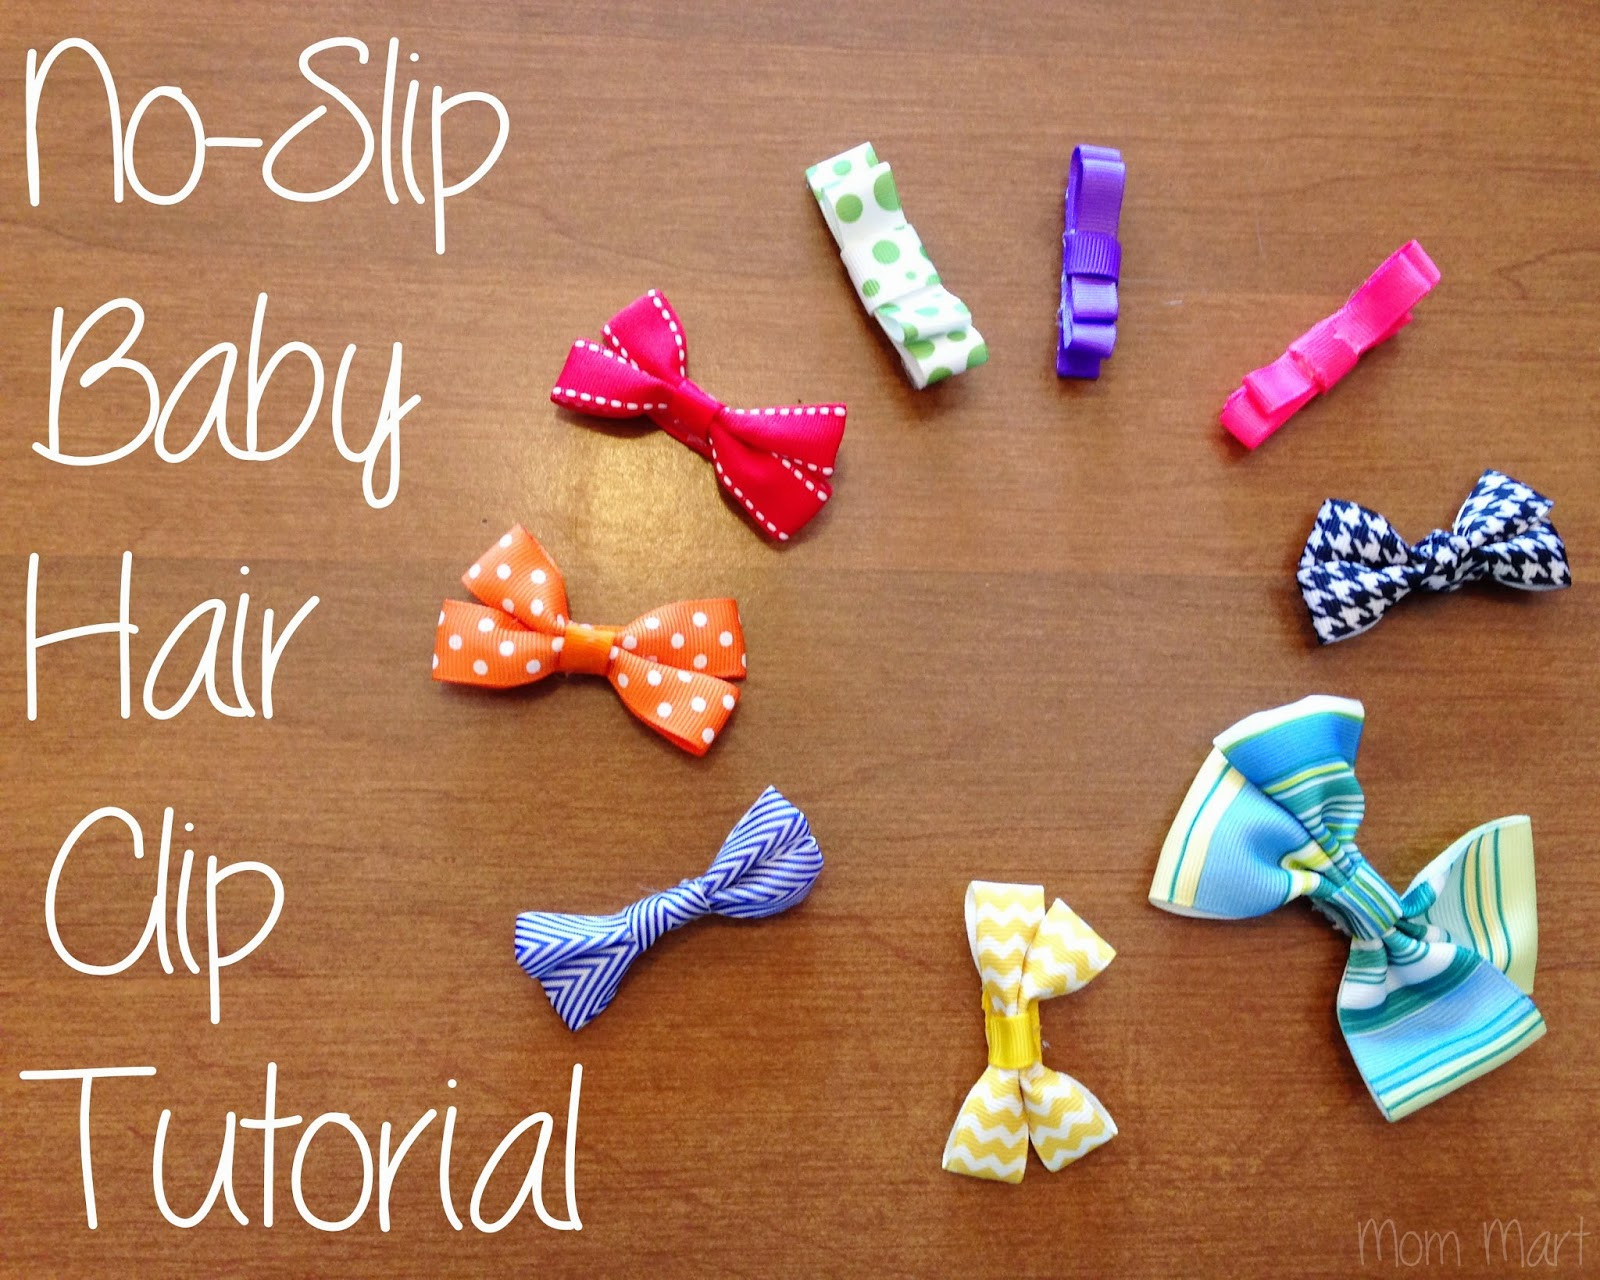 DIY Hair Clips For Toddlers
 Mom Mart DIY baby hair clips with a no slip grip Tutorial